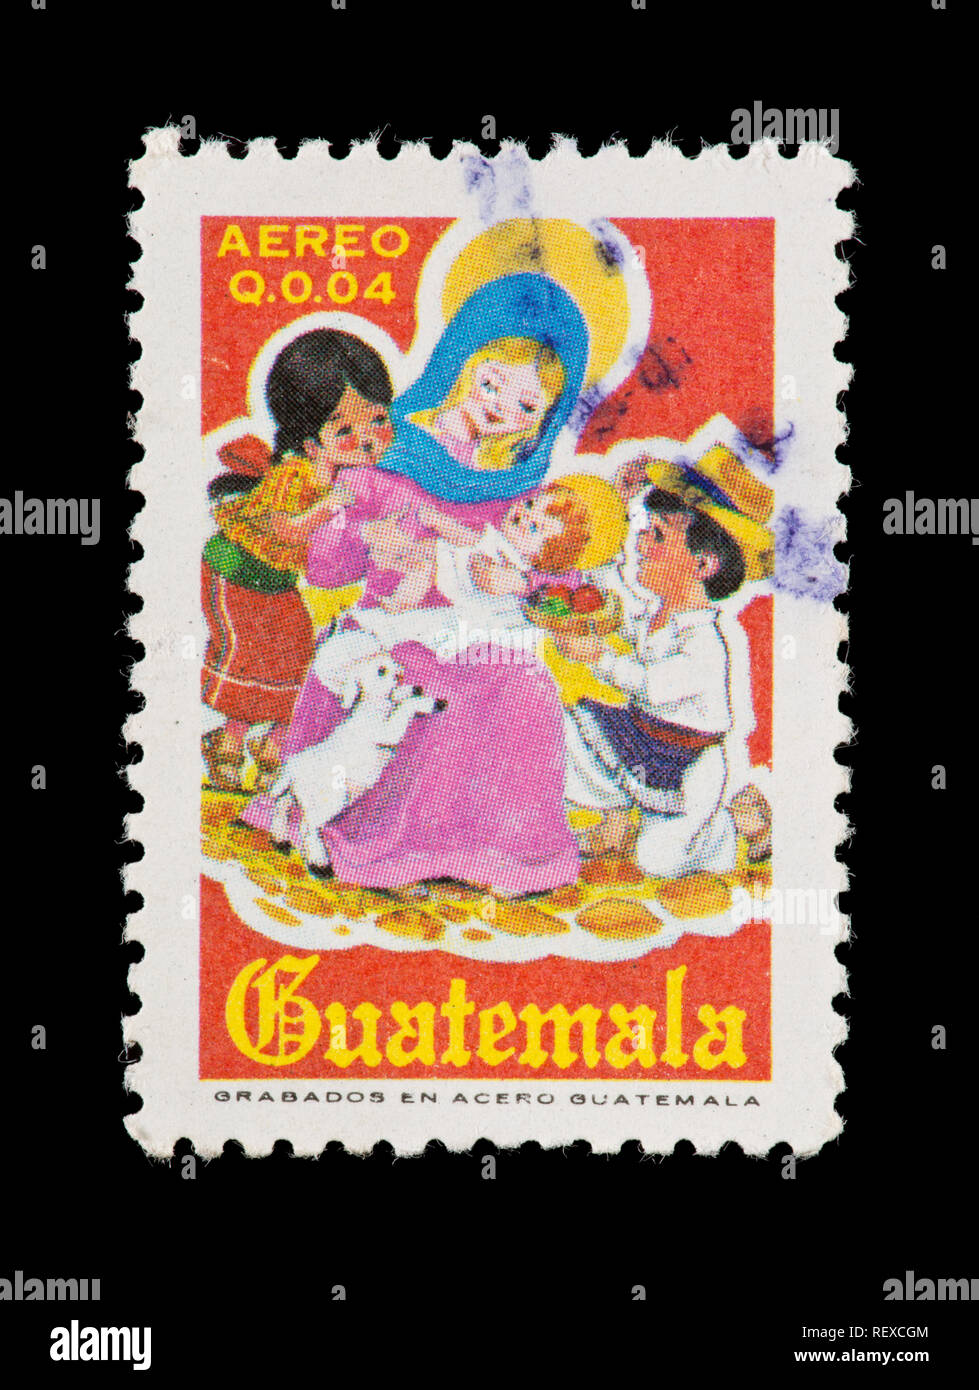 Postage stamp from Guatemala depicting children and a nativity scene. Stock Photo